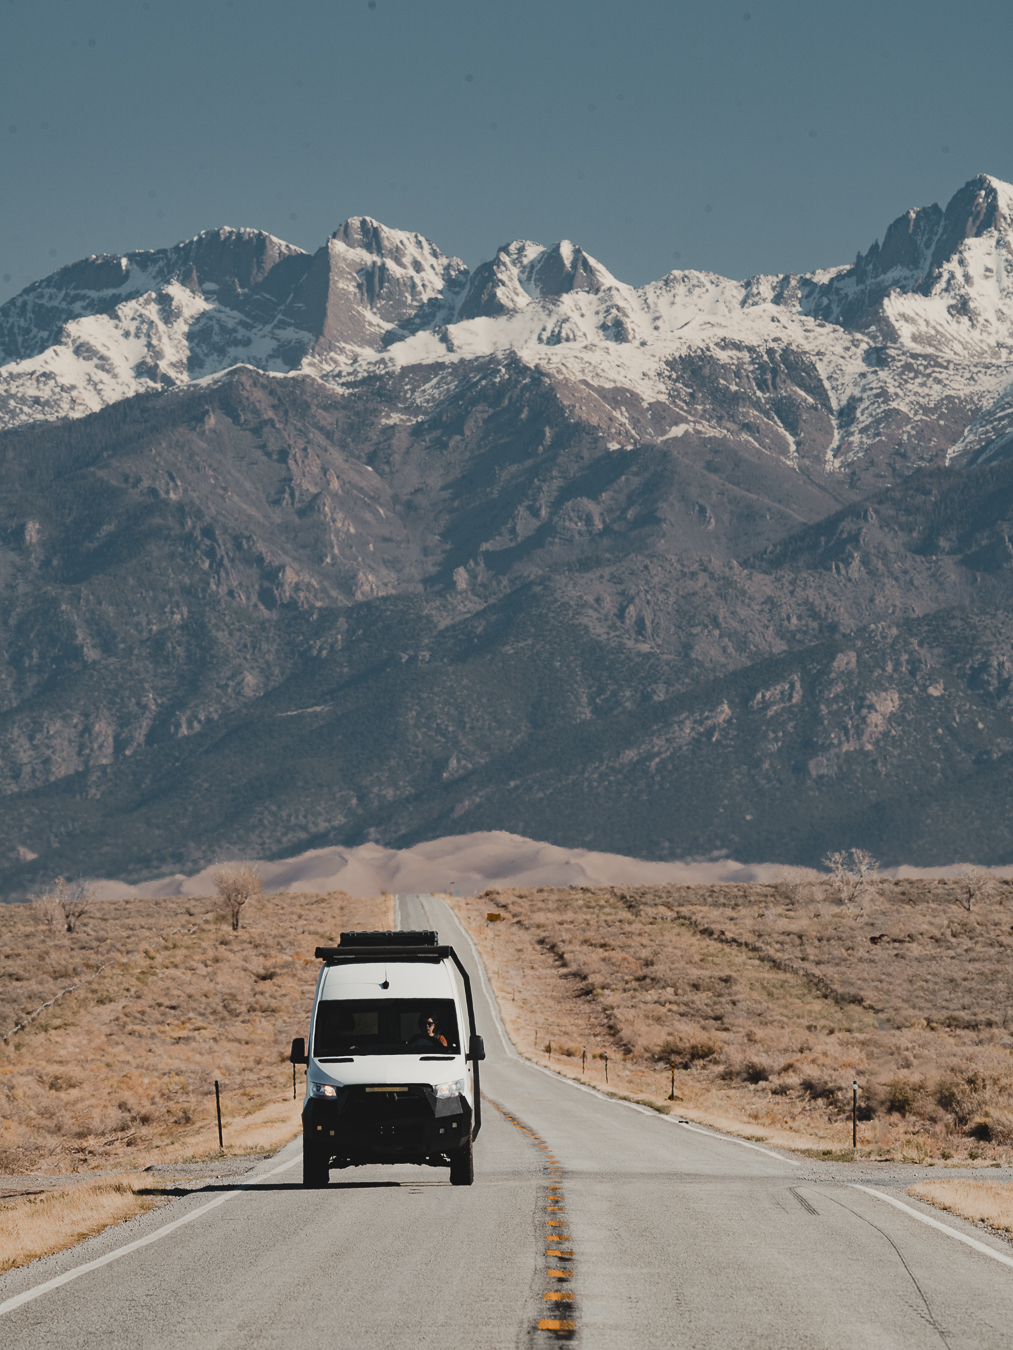 The road to Great Sand Dunes National Park